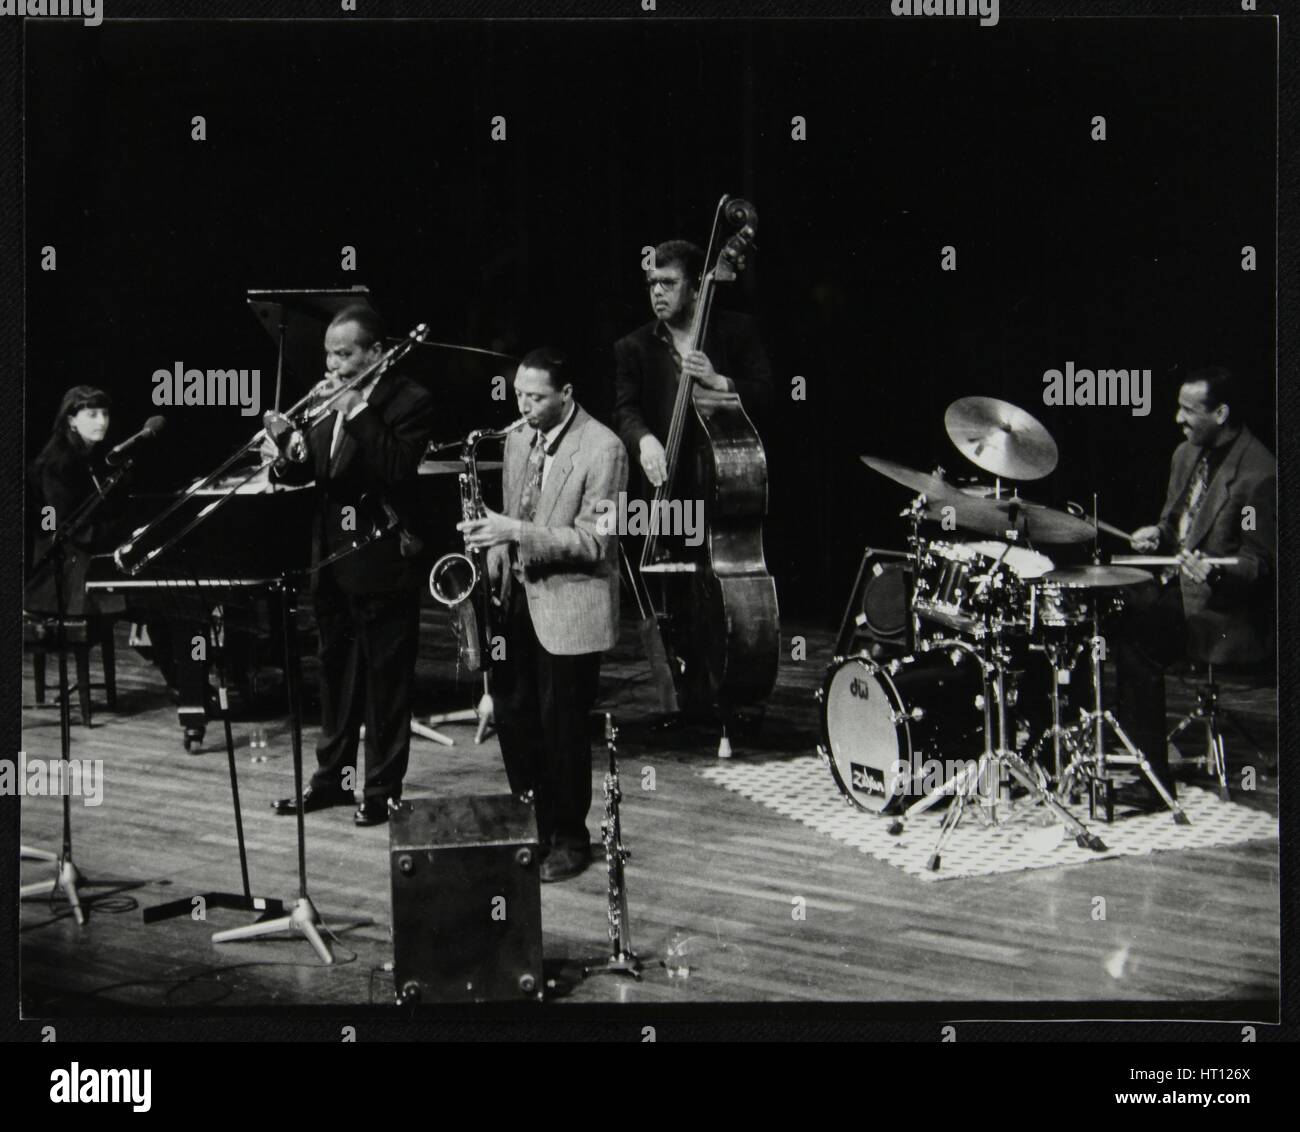 The JJ Johnson Quintet performing at the Hertfordshire Jazz Festival, St Albans Arena, 4 May 1993. Artist: Denis Williams Stock Photo